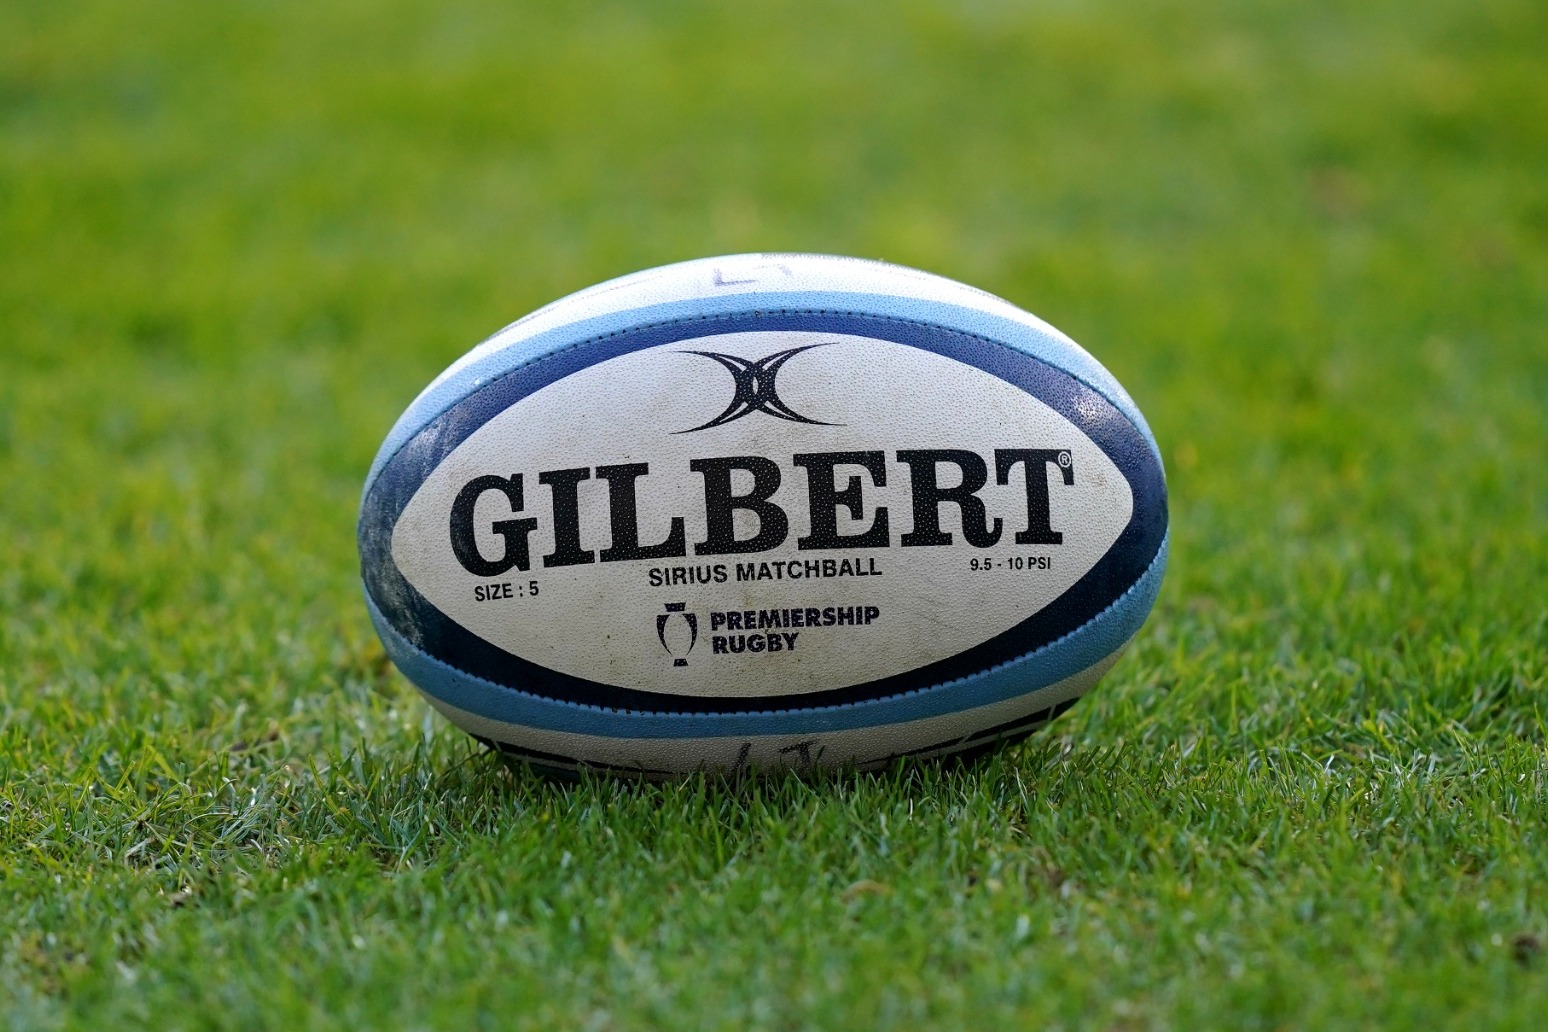 Alzheimer’s Society link key to helping former rugby players with dementia – RPA 